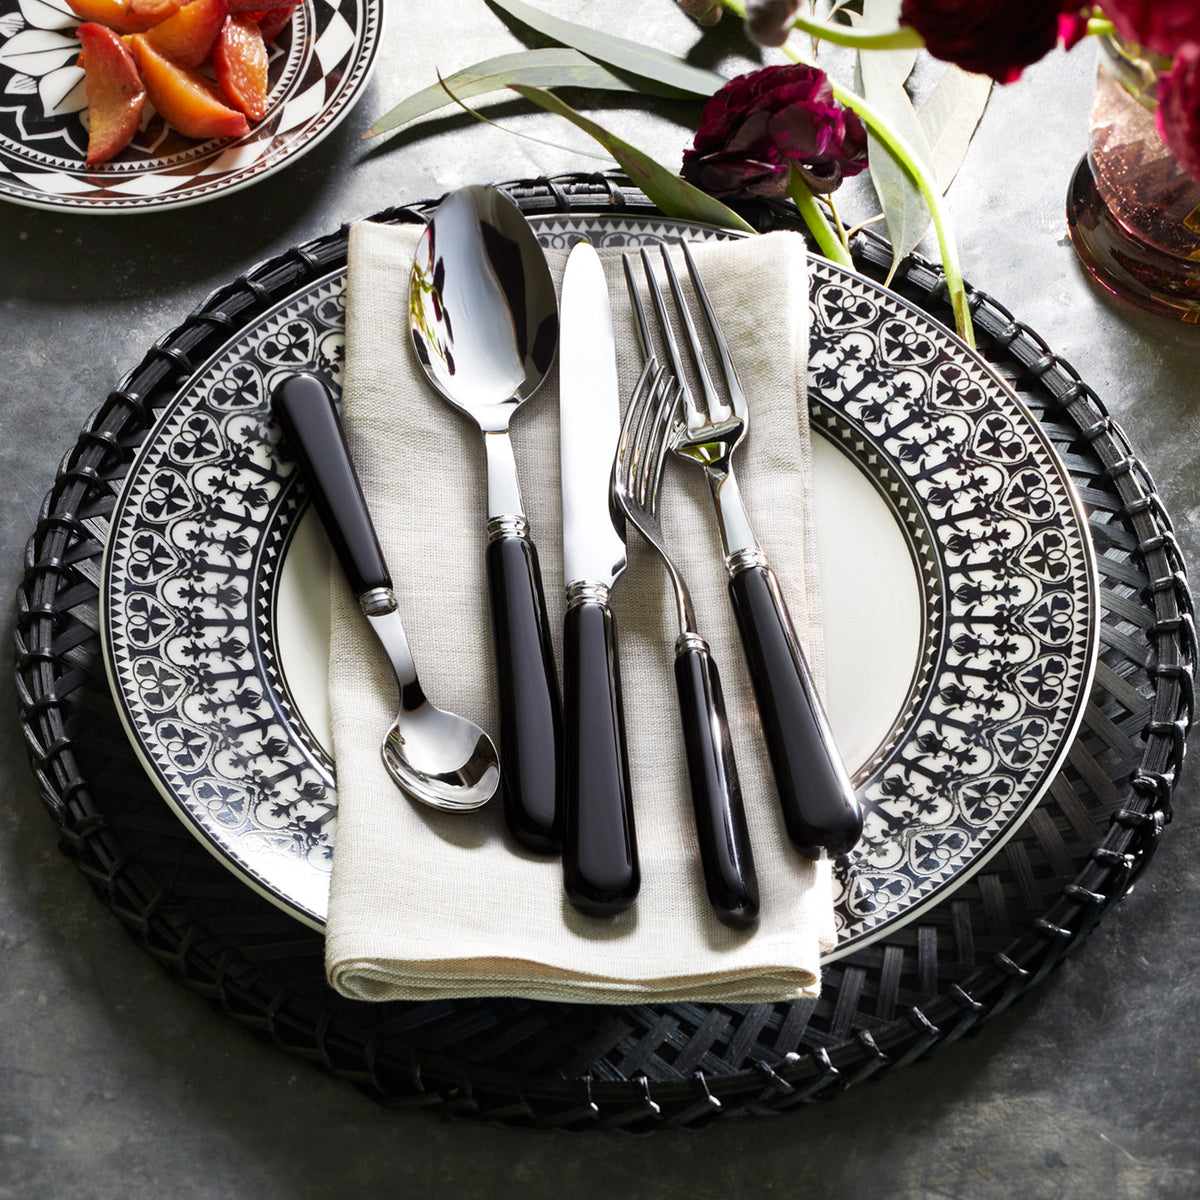 A high-quality Bistro Black 5-Piece Flatware Setting by Sabre with a black and white dinnerware.